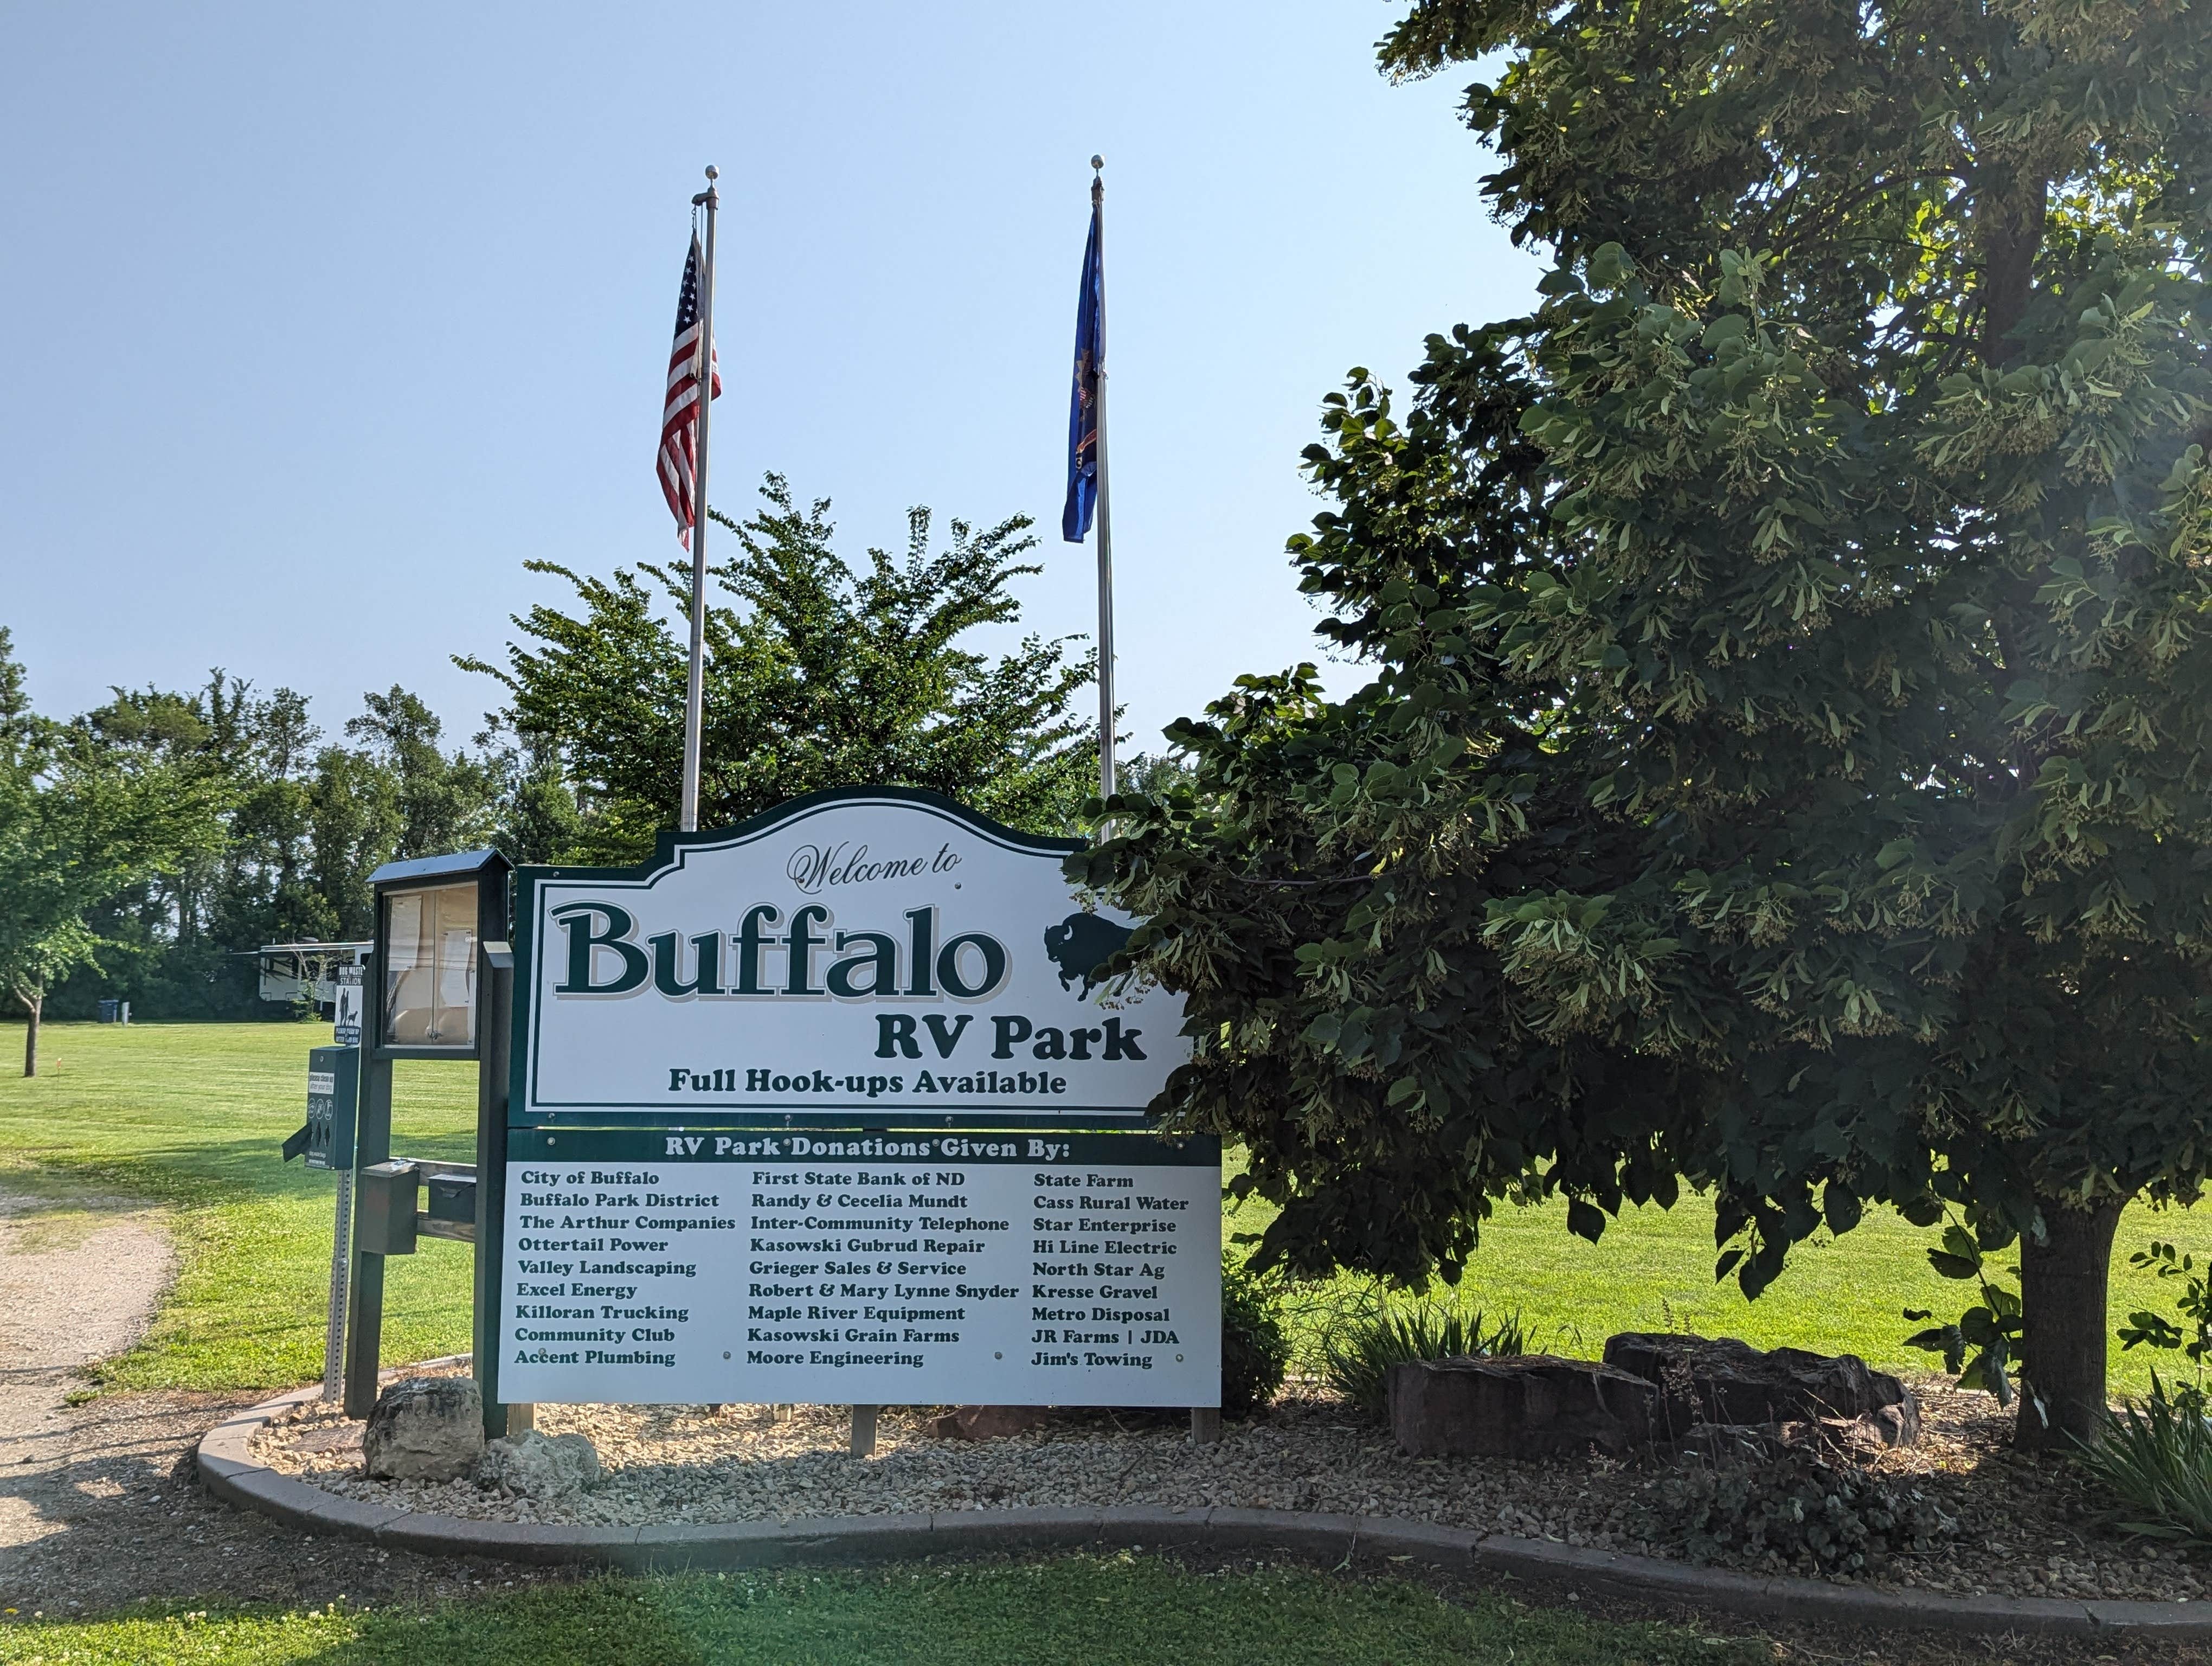 Camper submitted image from Buffalo RV Park - 1